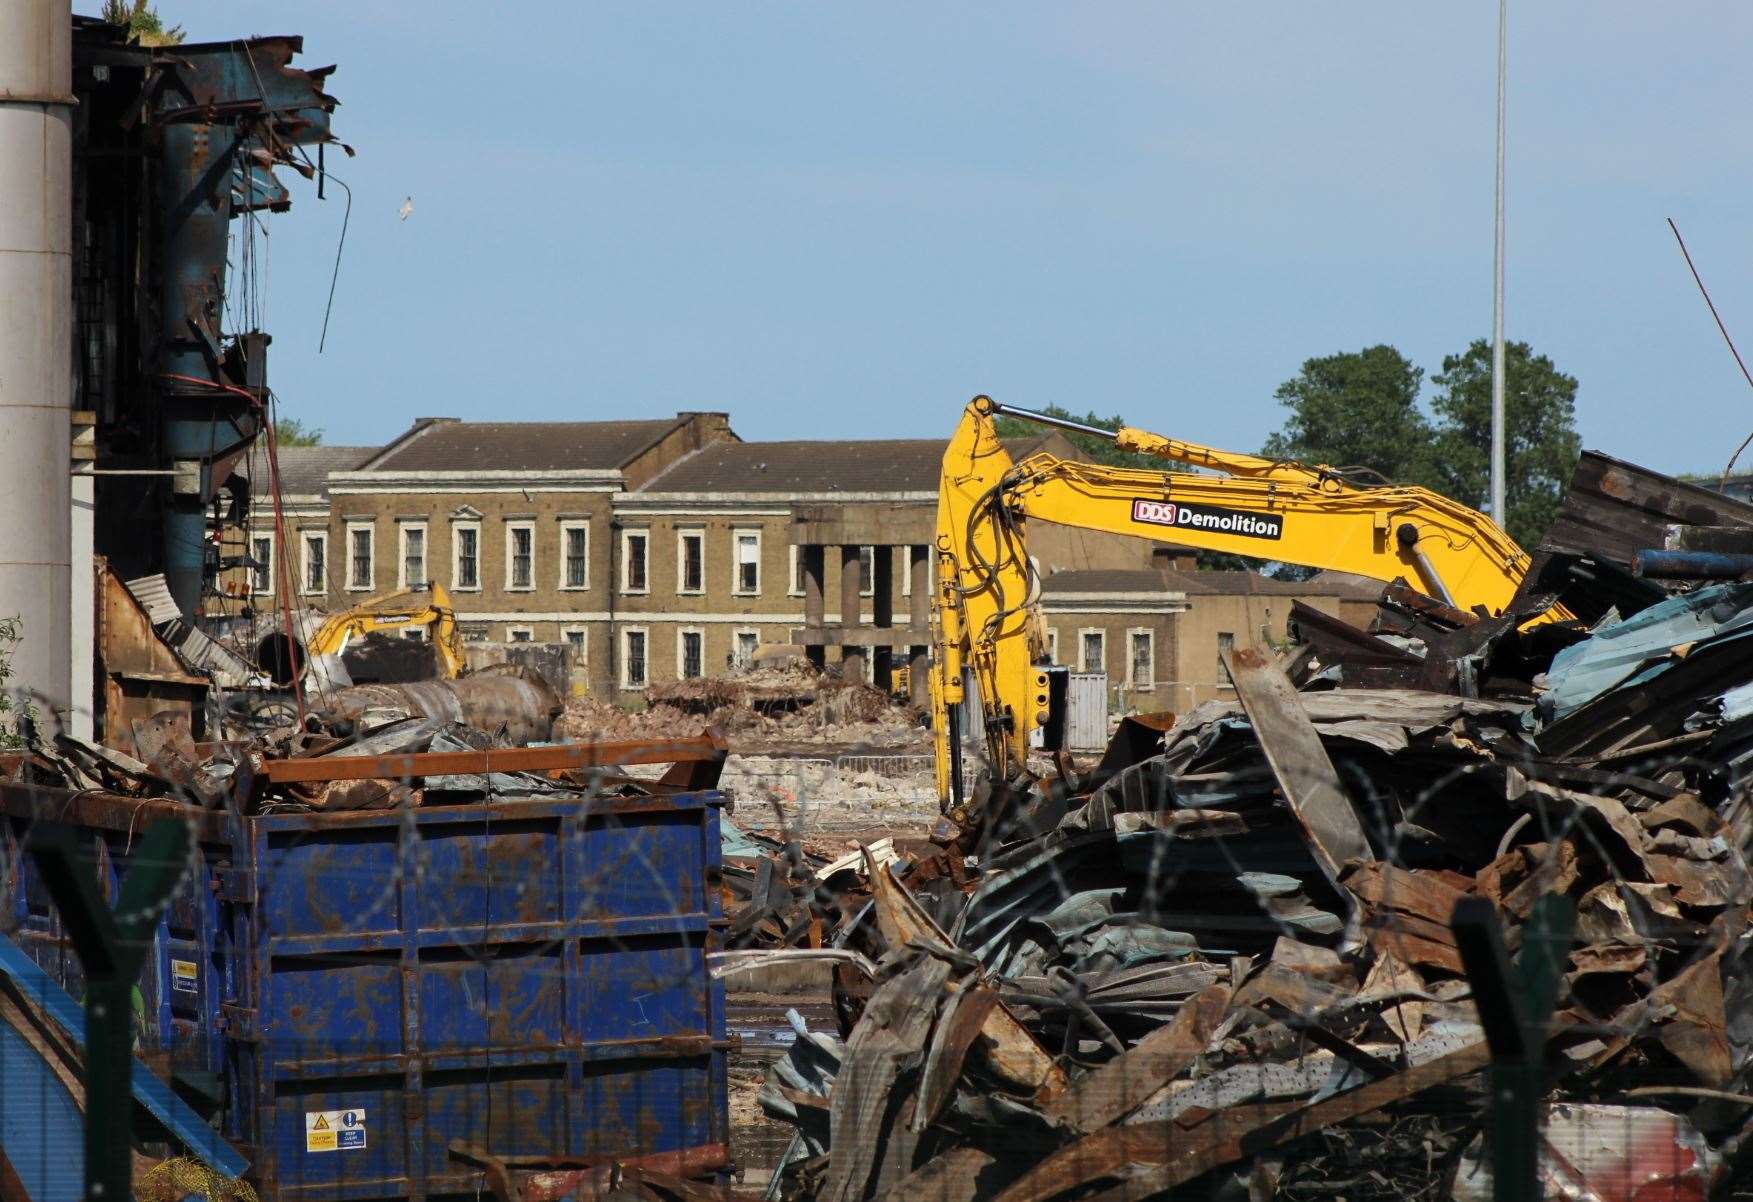 Work on pulling down the final sheds at Sheerness Steel Mill is gathering momentum, revealing the former Royal Navy Military Hospital